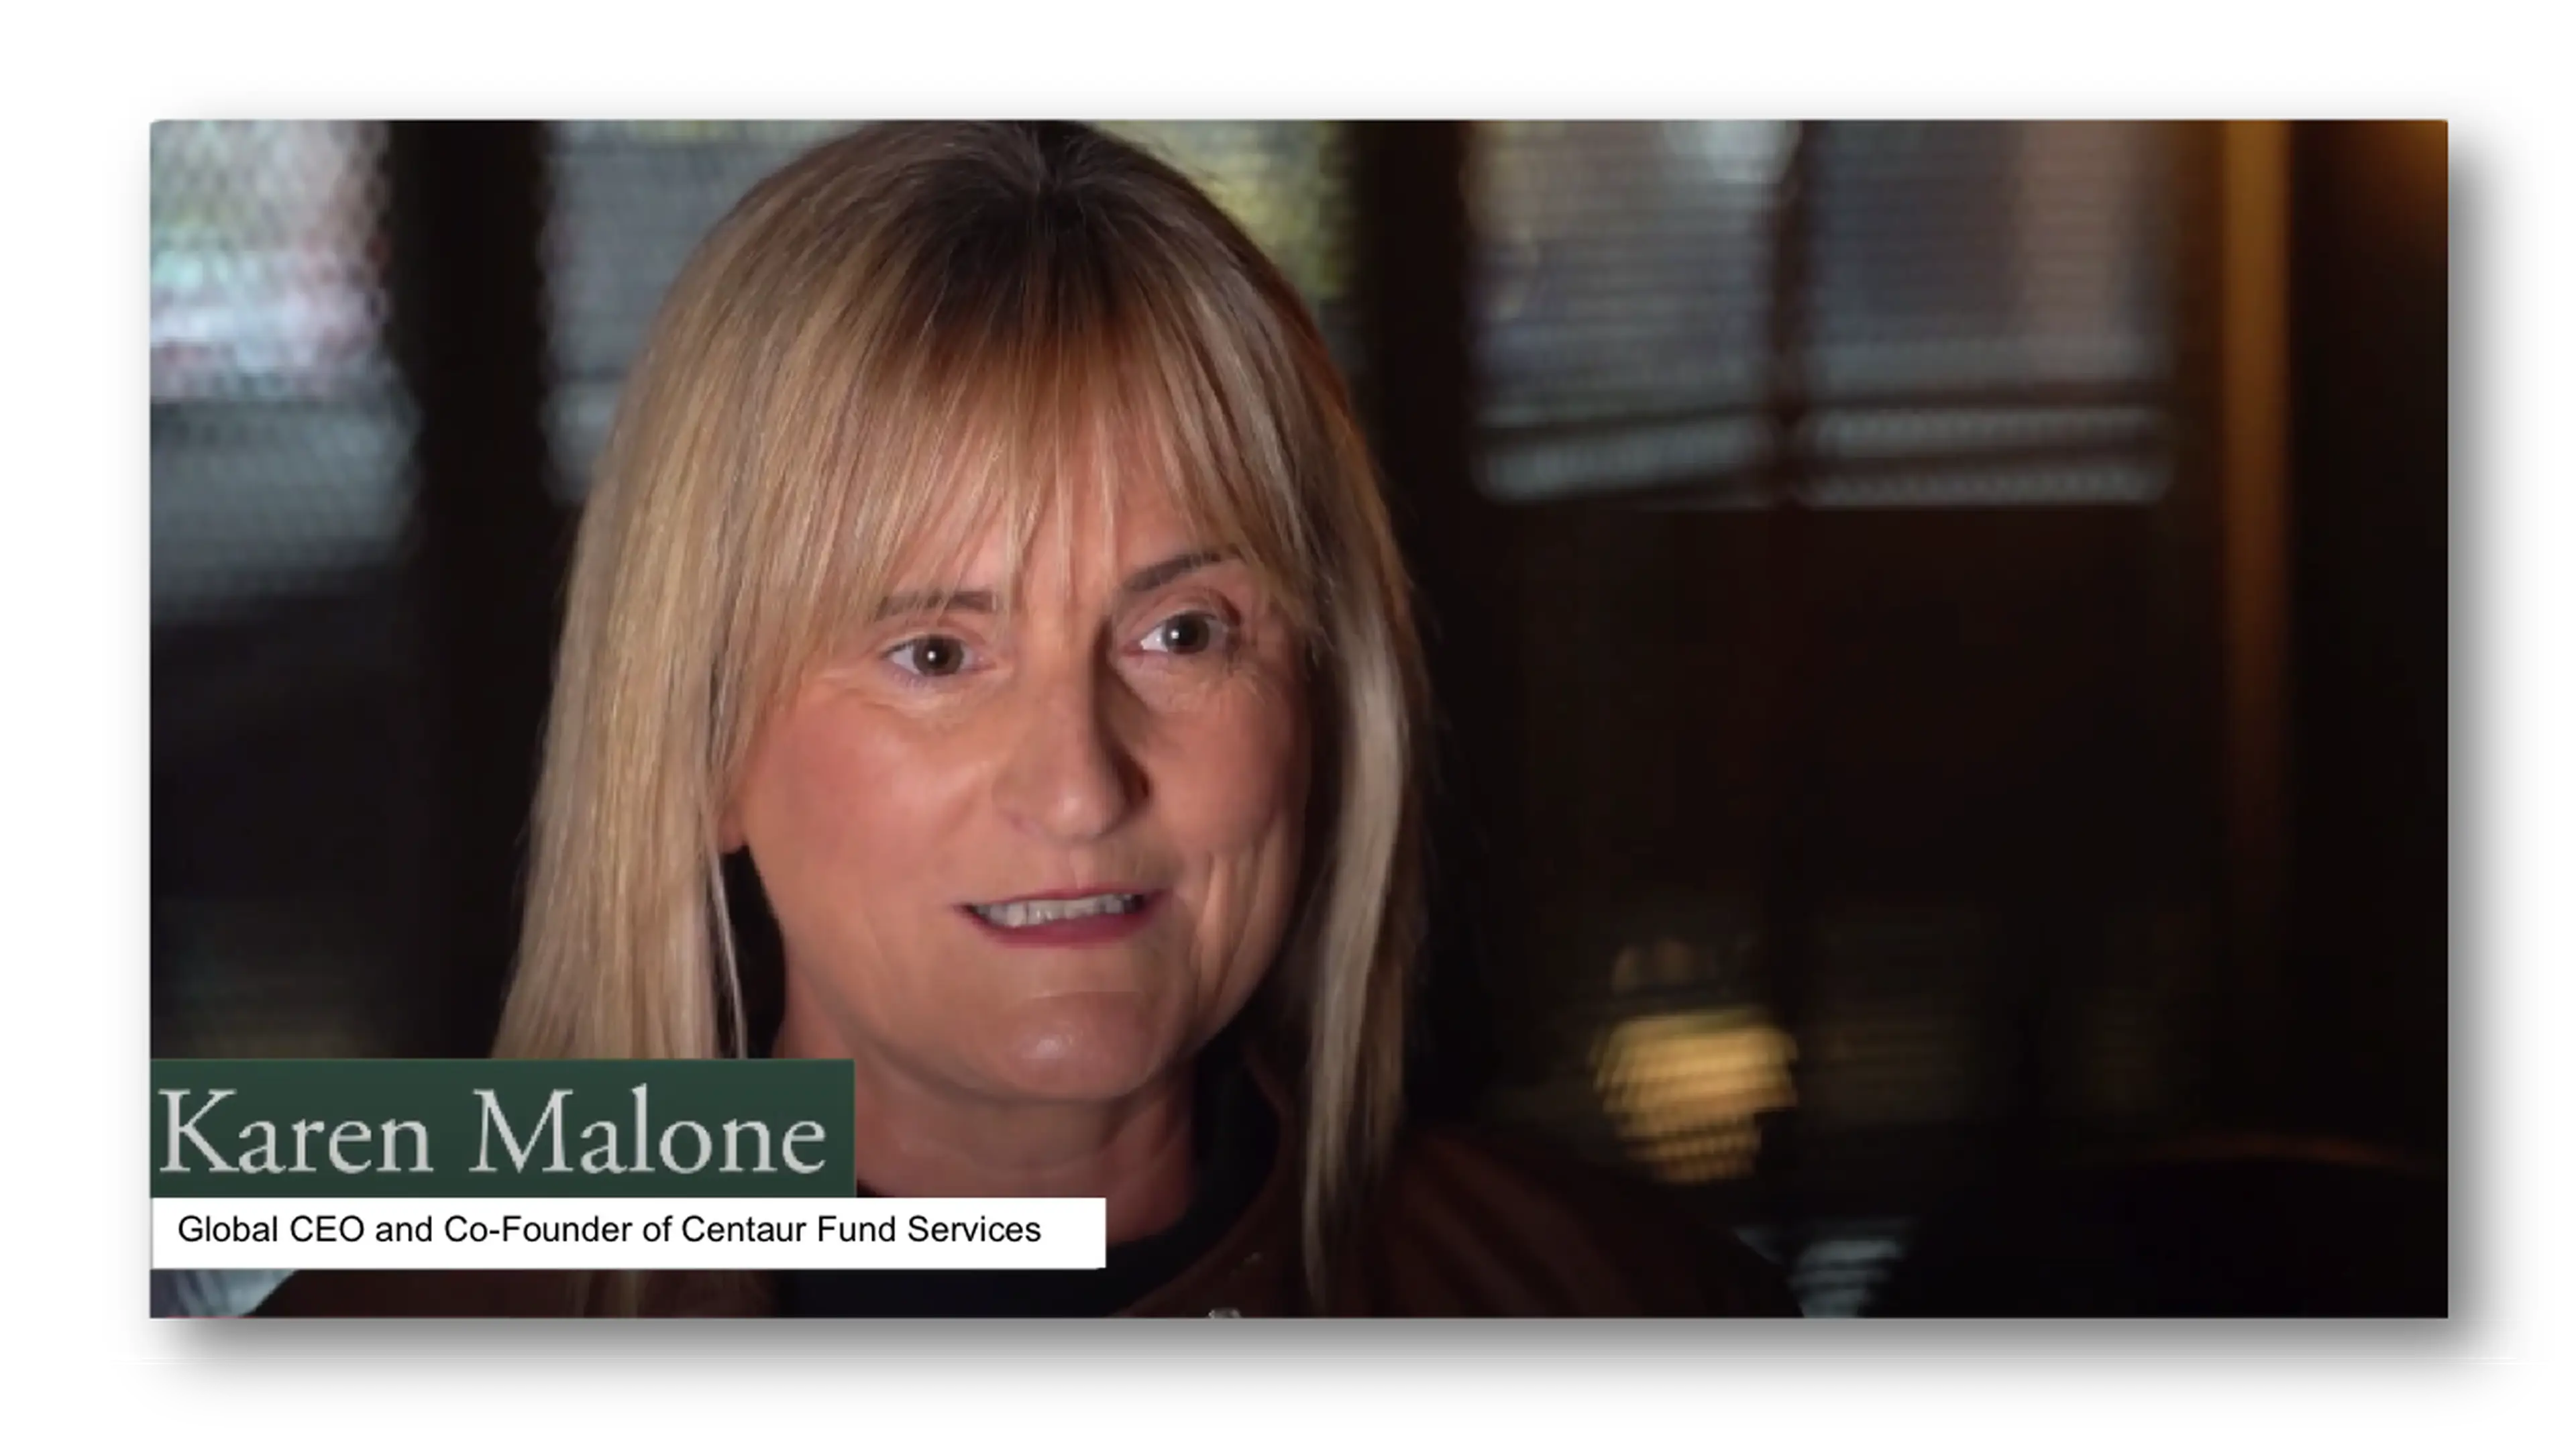 Karen Malone, Global CEO and Co-Founder of Centaur Fund Services, talks about their transactions with FTV Capital, selling their business to Waystone Group and their experience with Key Capital as Corporate Finance advisors.